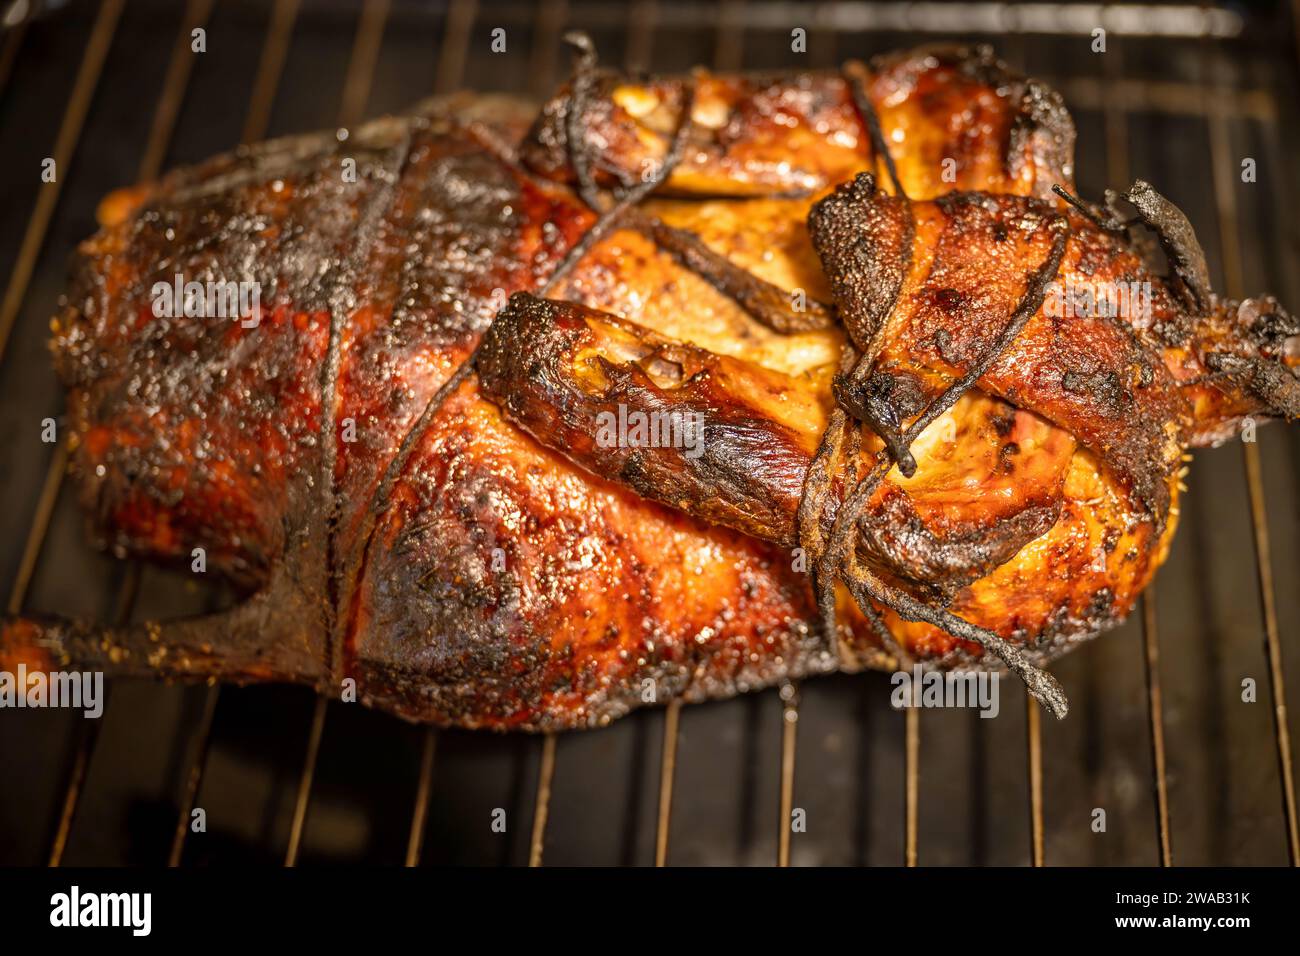 Whole roasted peking duck on baking grid, body tied up, chinese cuisine, closeup. Stock Photo